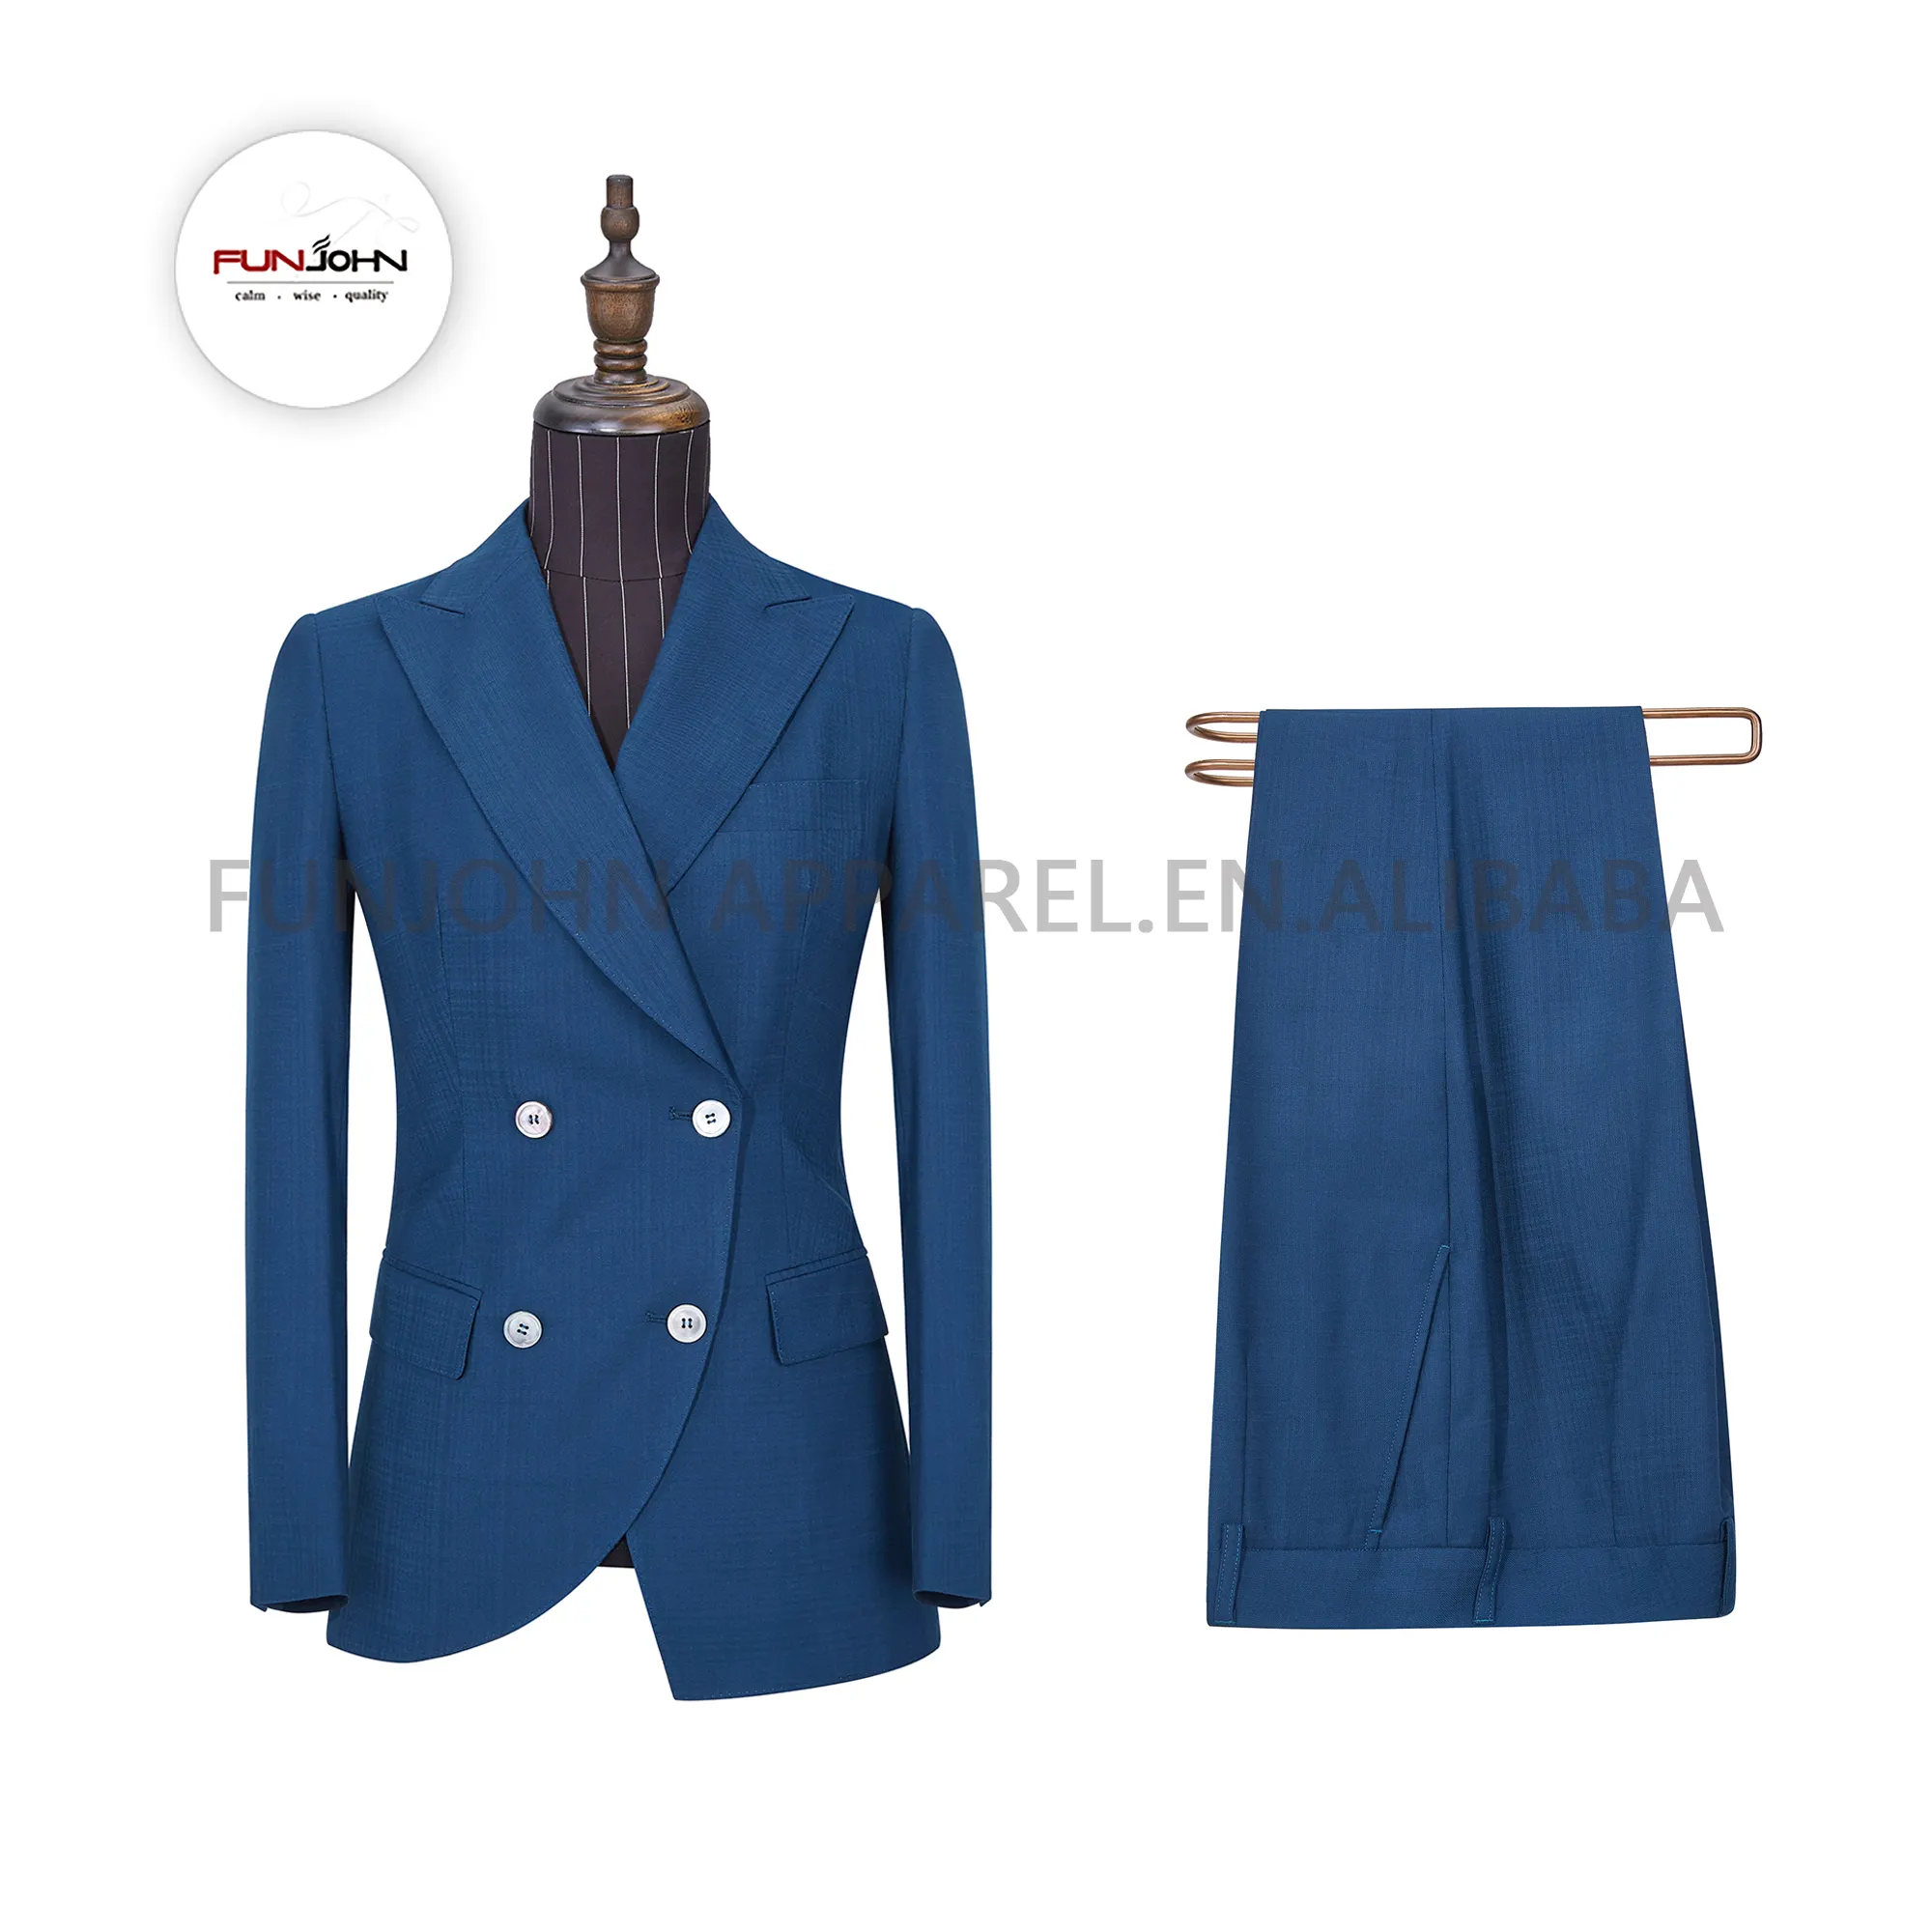 Women Formal Worsted Wool Business Jacket Suit 2pcs Double-breasted Designs Suits Pants Blazer For Office Ladies